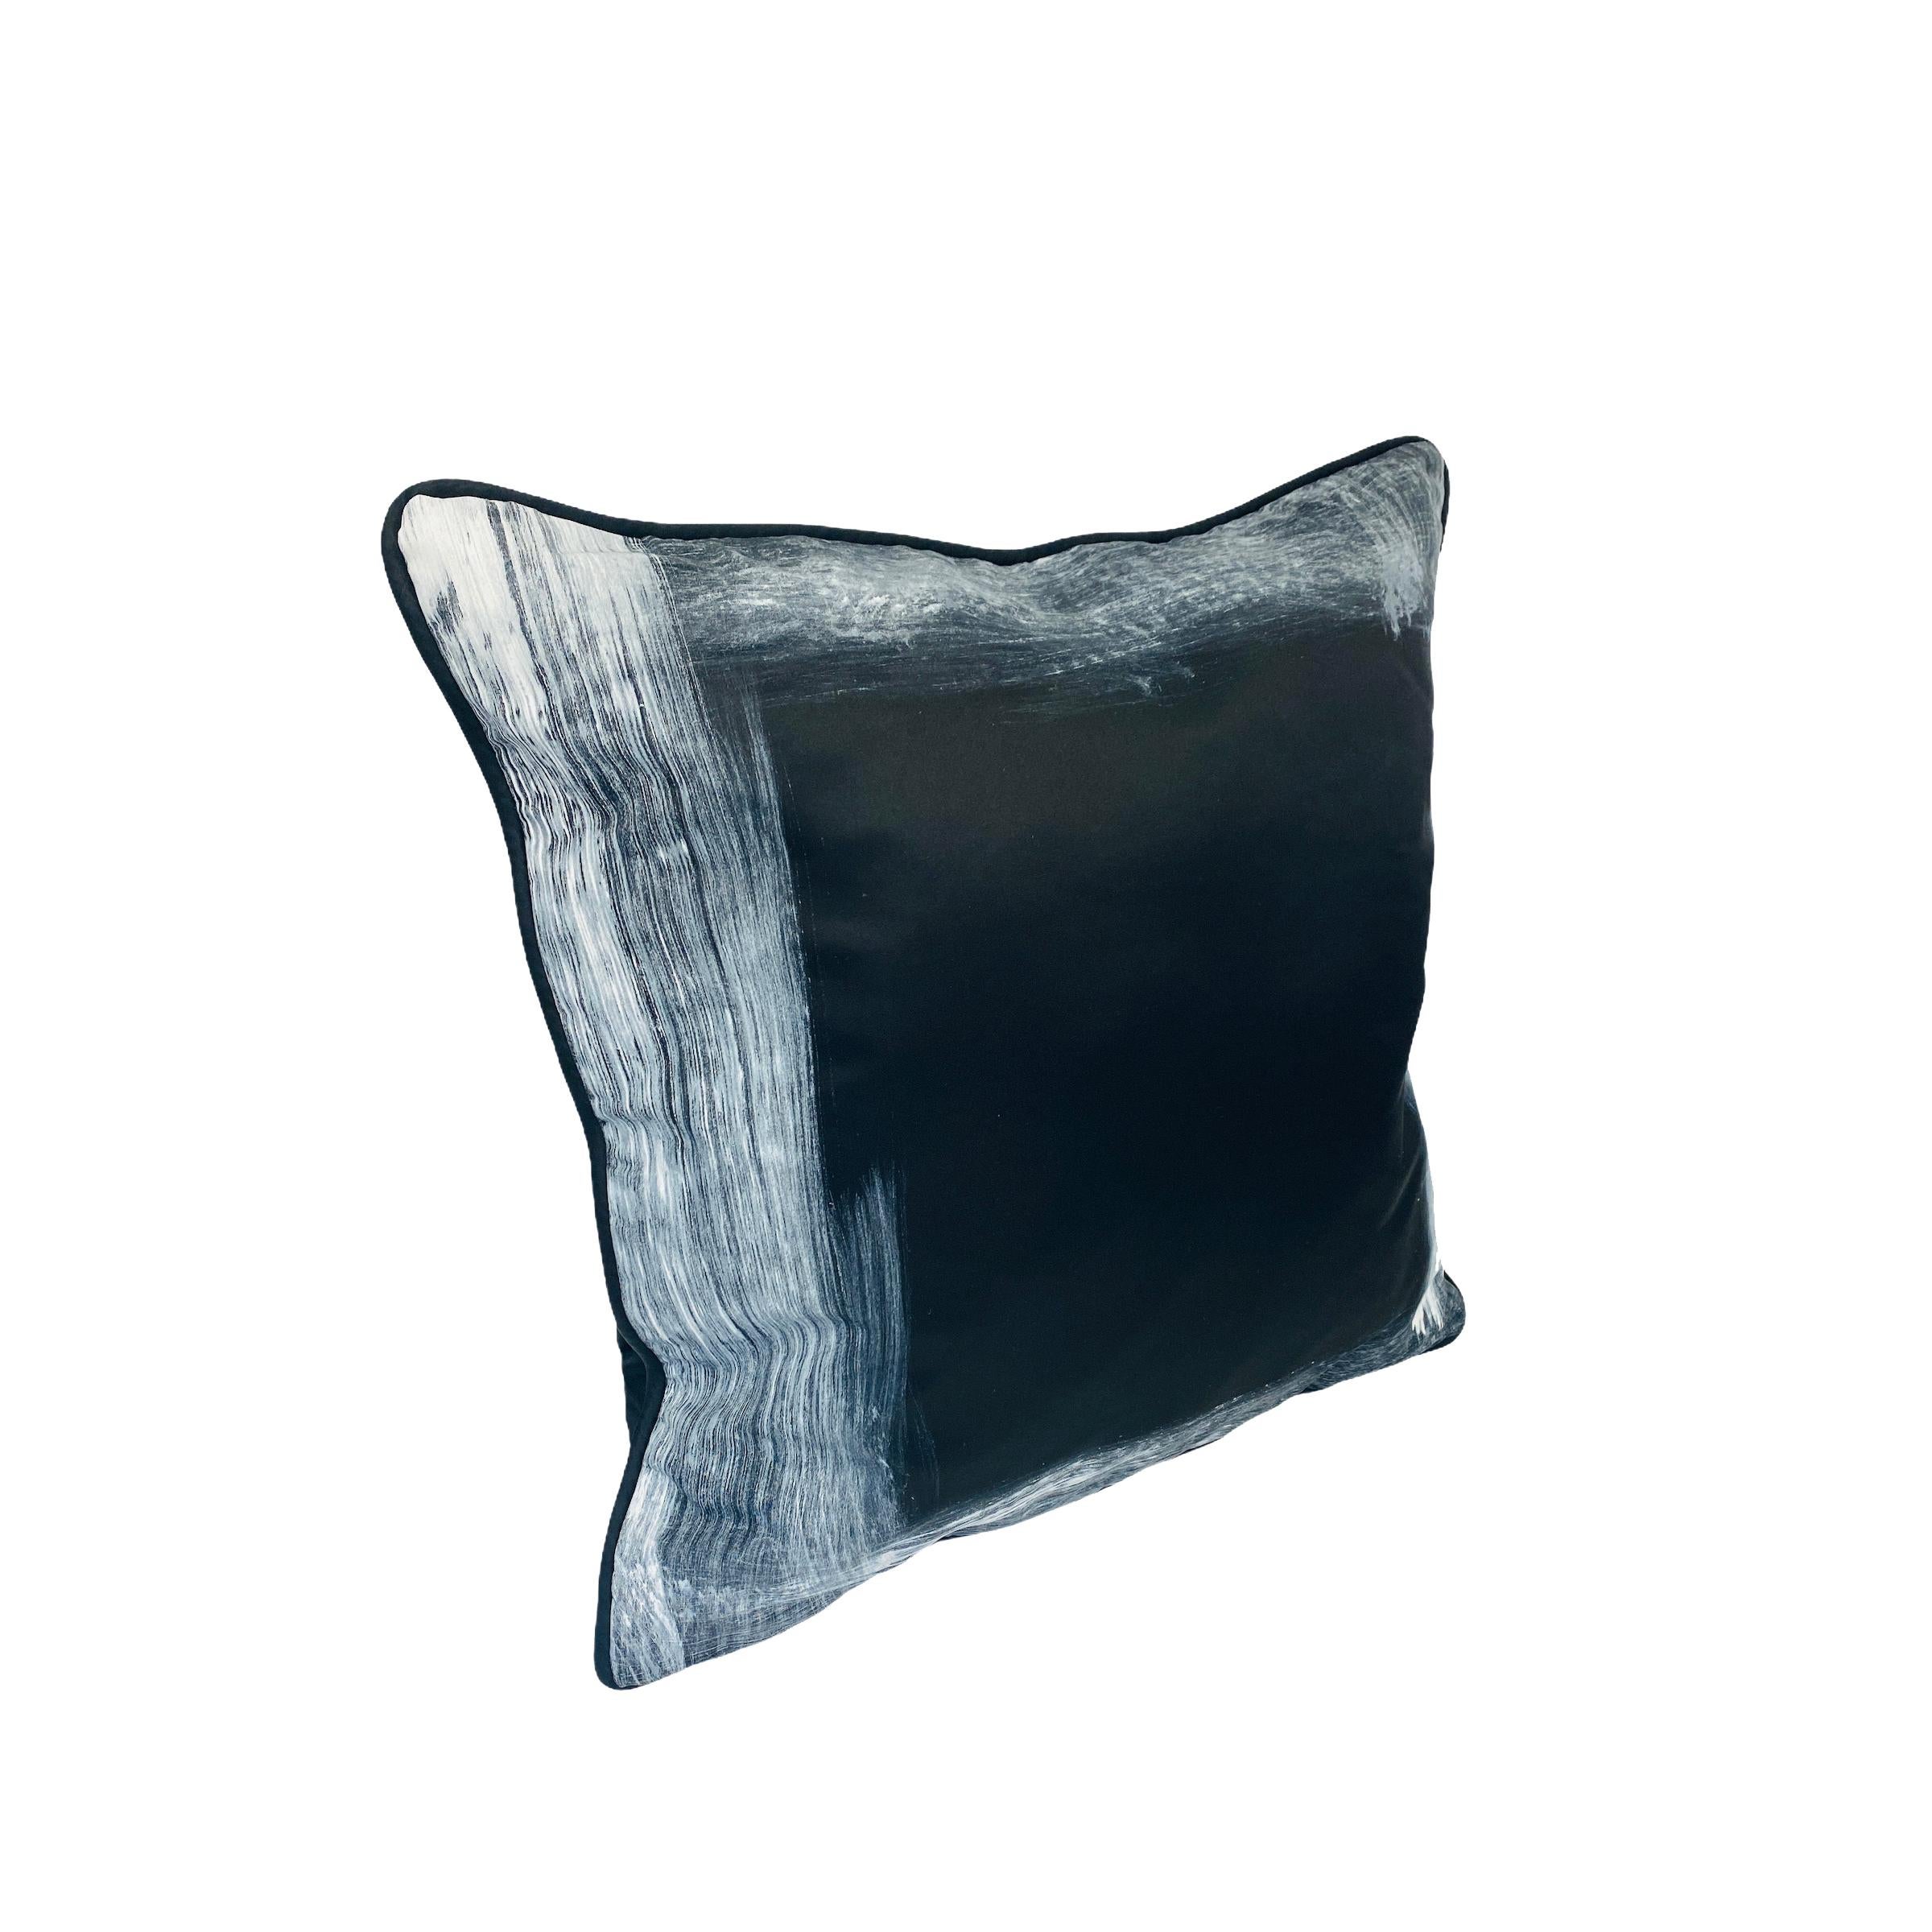 Minimalist Black Contemporary Delicately Hand-Painted White-Edged Throw Pillows For Sale